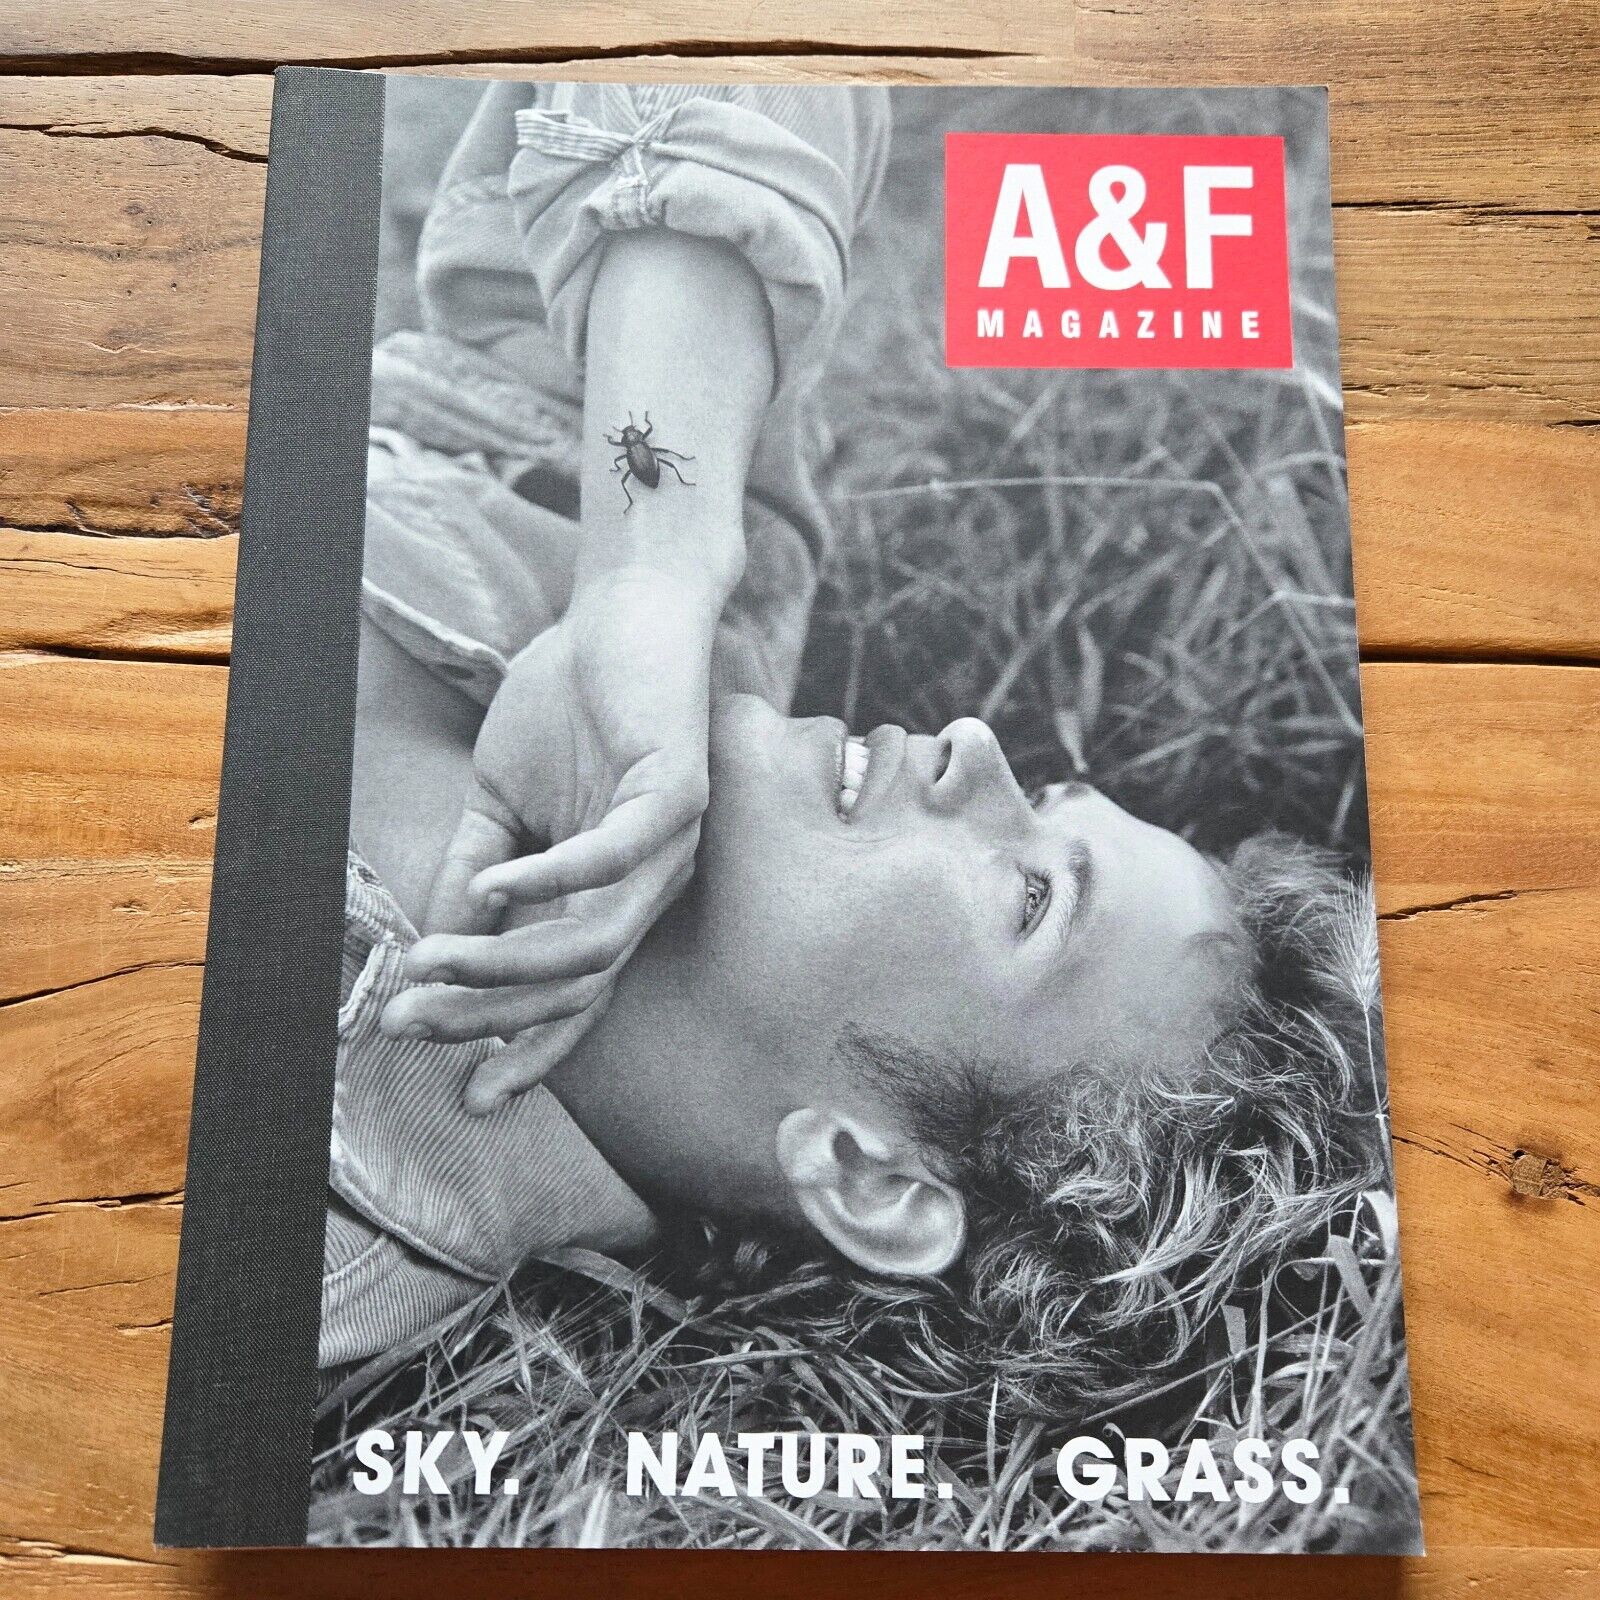 A&F - Abercrombie & Fitch - #1 Magazine Catalog - FIRST ISSUE 2004 - BRAND NEW